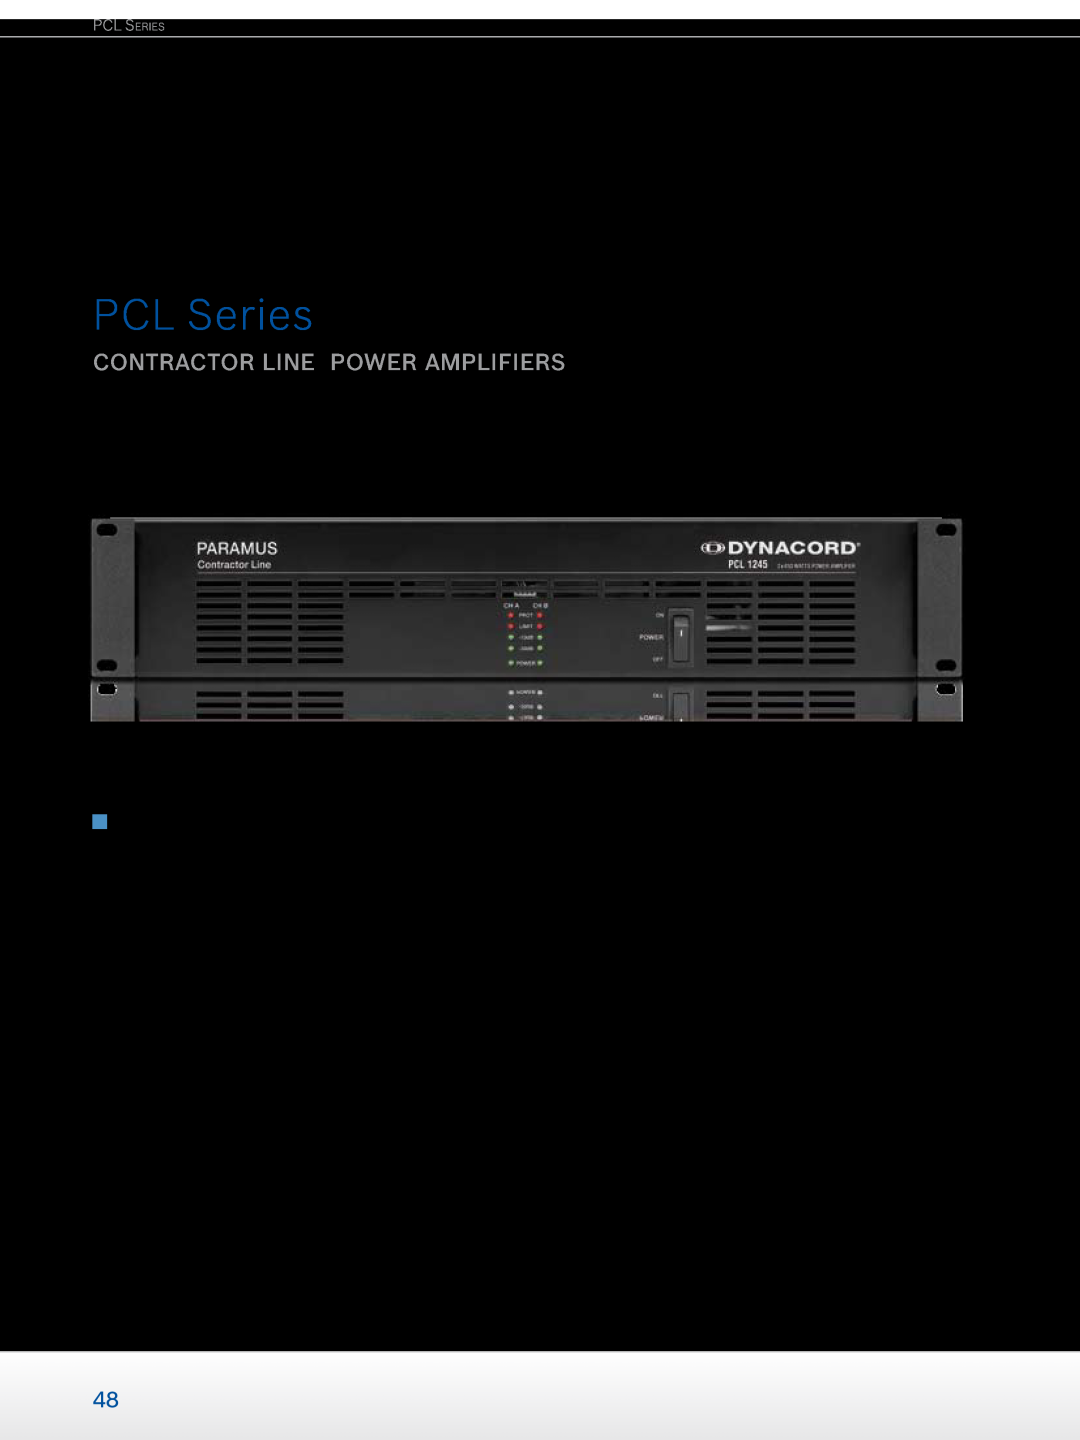 Dynacord Professional Power Amplifiers manual PCL Series, contractor line power amplifiers 